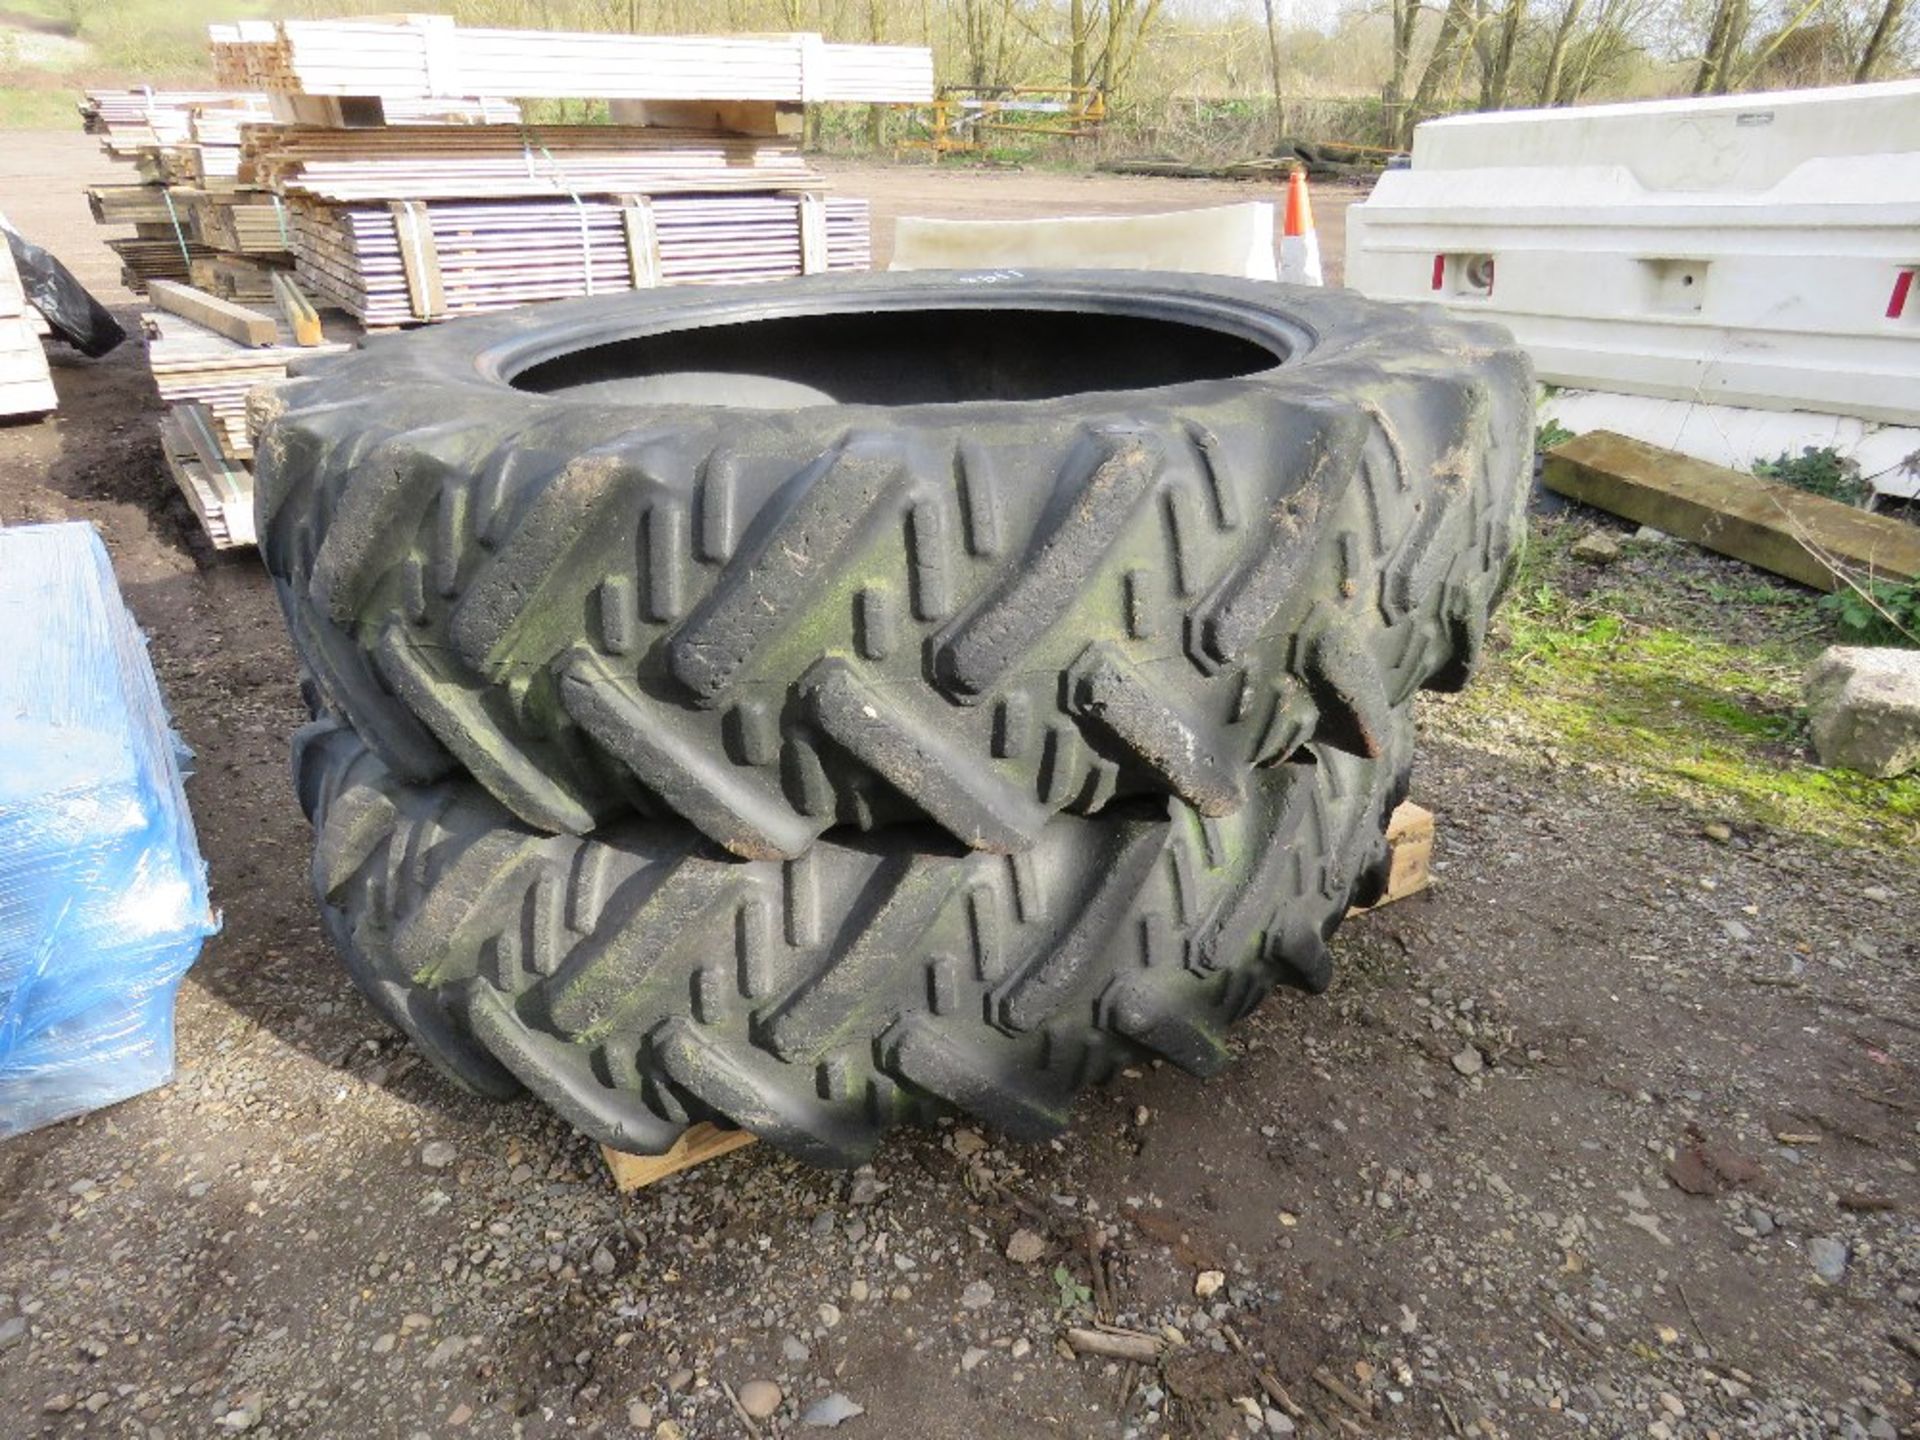 2 X TRACTOR REAR TYRES, 13.6R36 SIZE.